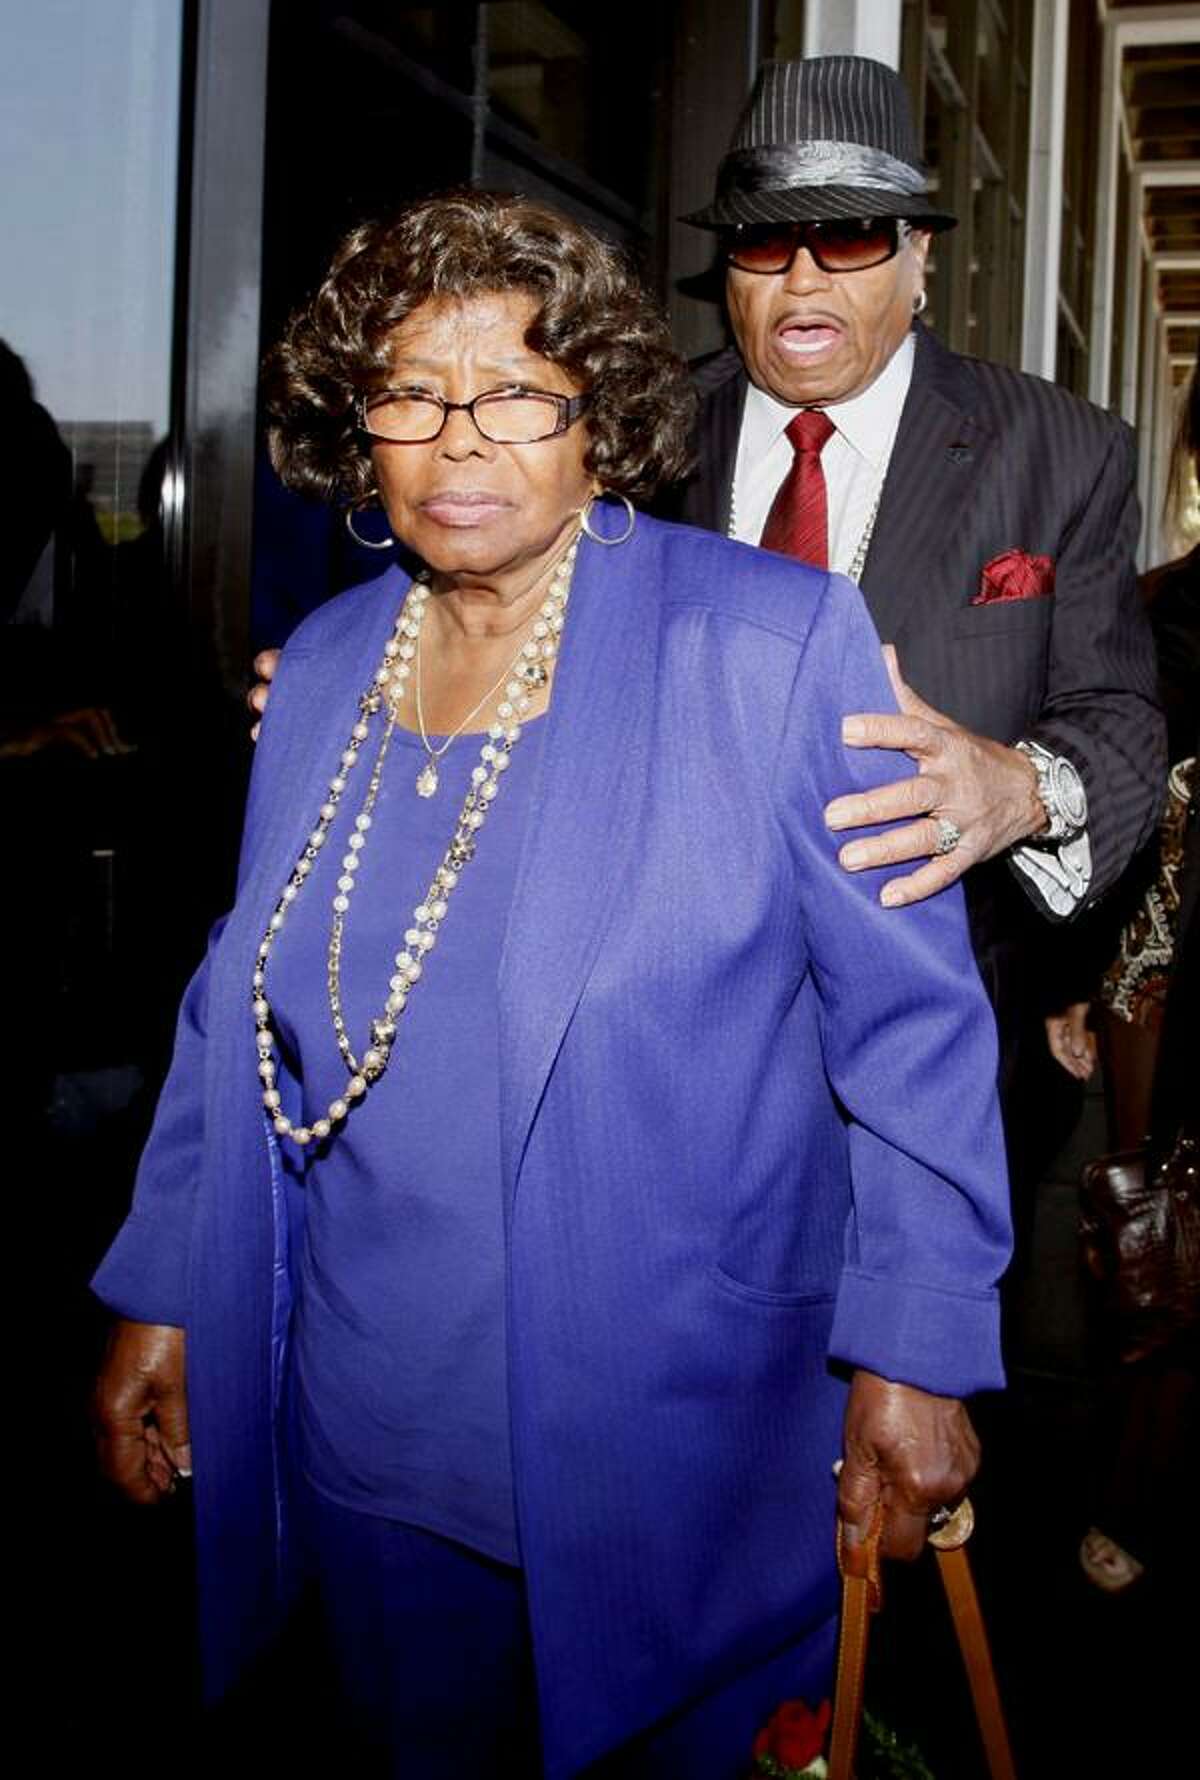 In this June 14 file photo, Michael Jackson's parents, Katherine Jackson and Joe Jackson leave a Los Angeles courthouse after a preliminary hearing in the trial of Michael Jackson's personal doctor Conrad Murray. (AP)